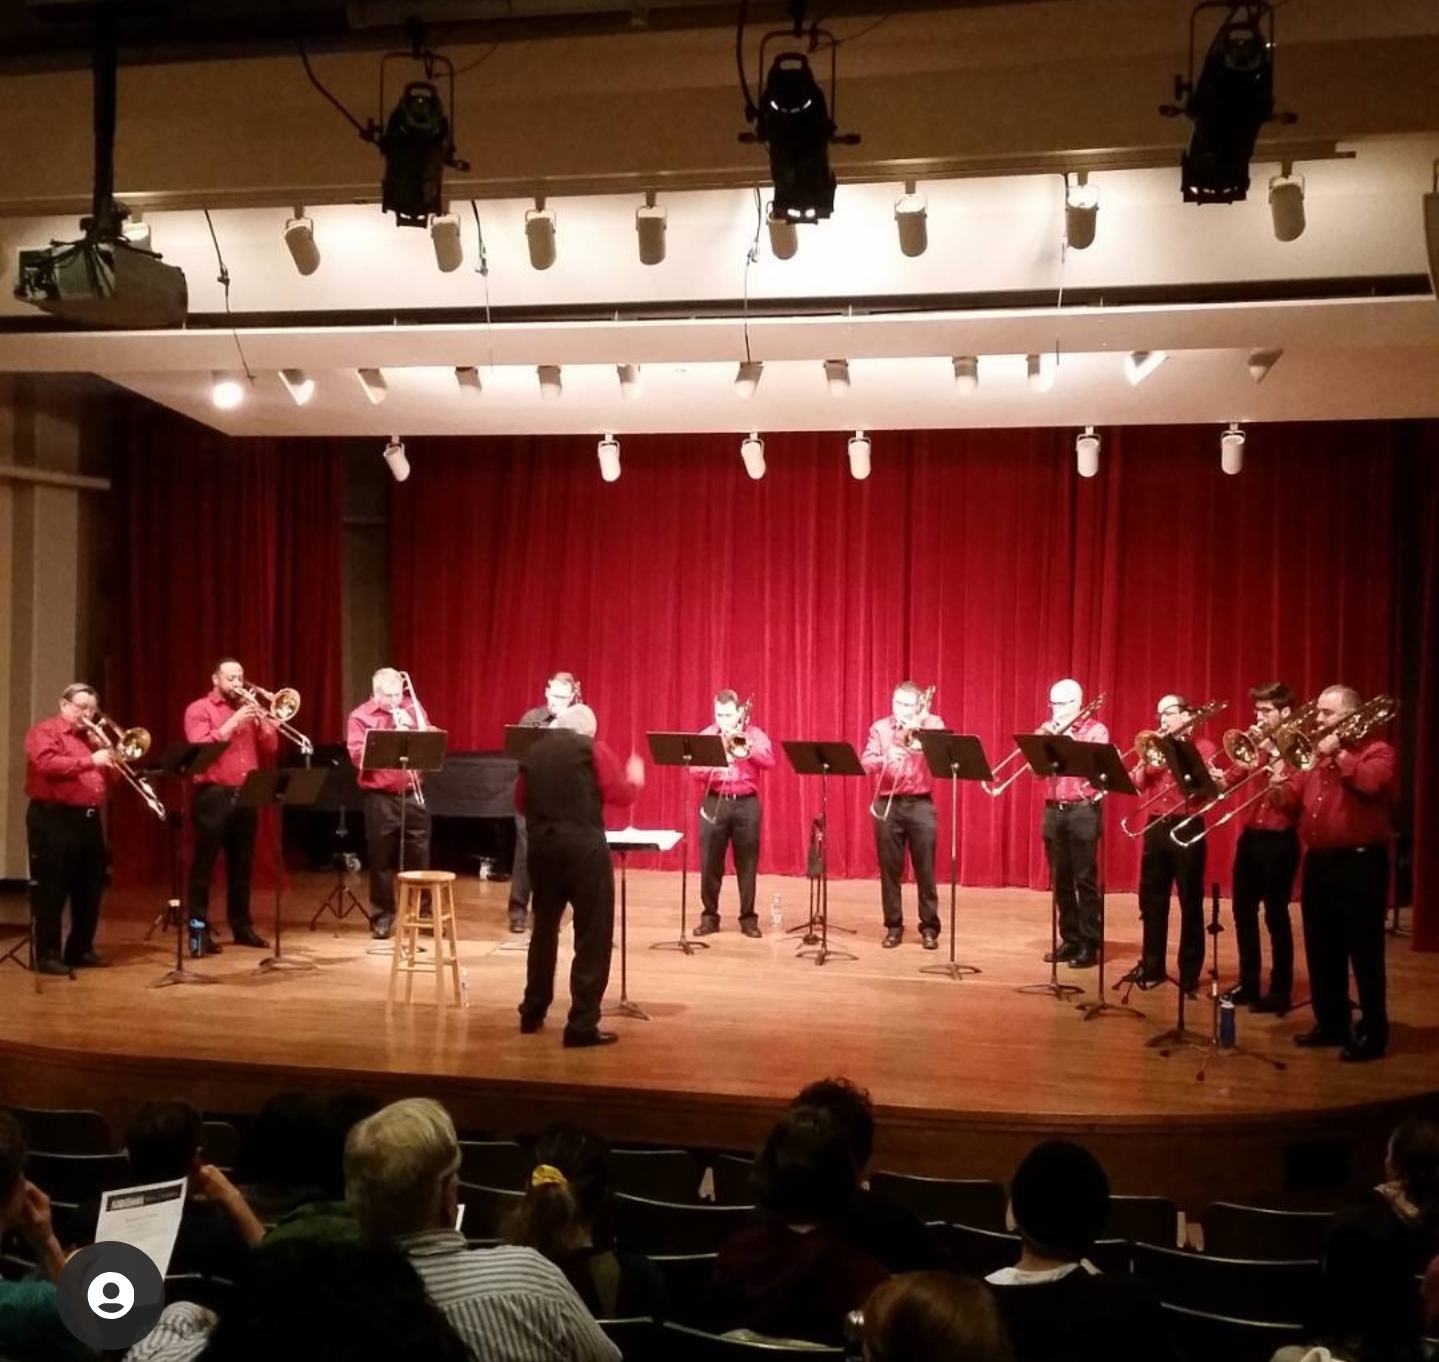 ensemble performing in the recital hall